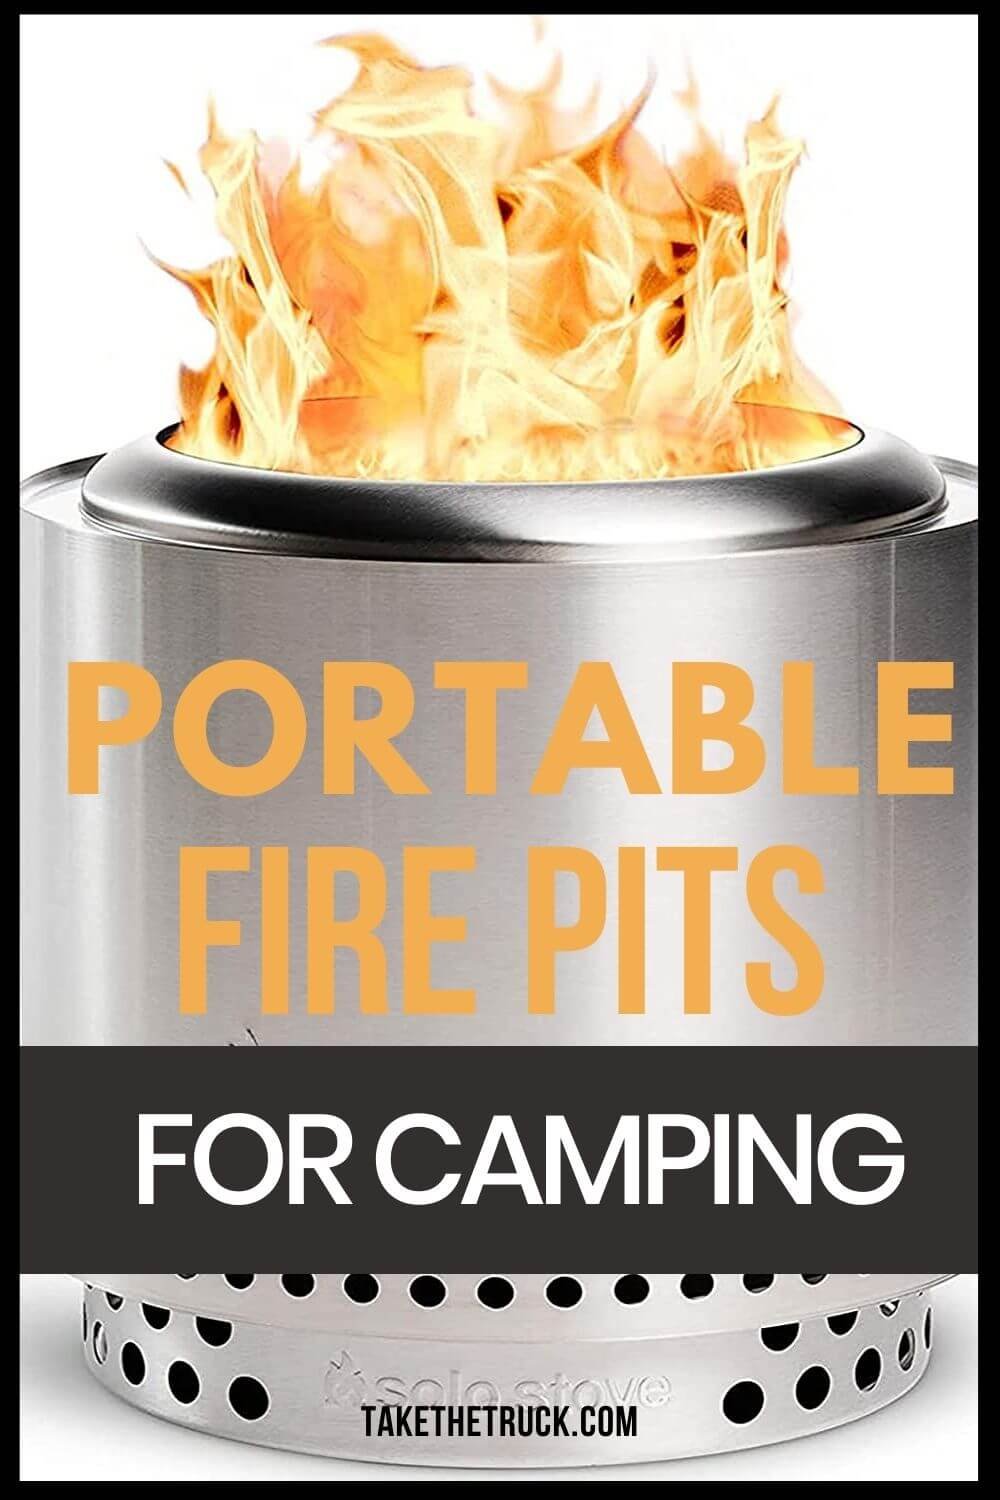  - portable fireplace for camping - portable propane fire pit for camping - wood burning camping fire pit - Best portable fire pit for camping - portable camping fire pit